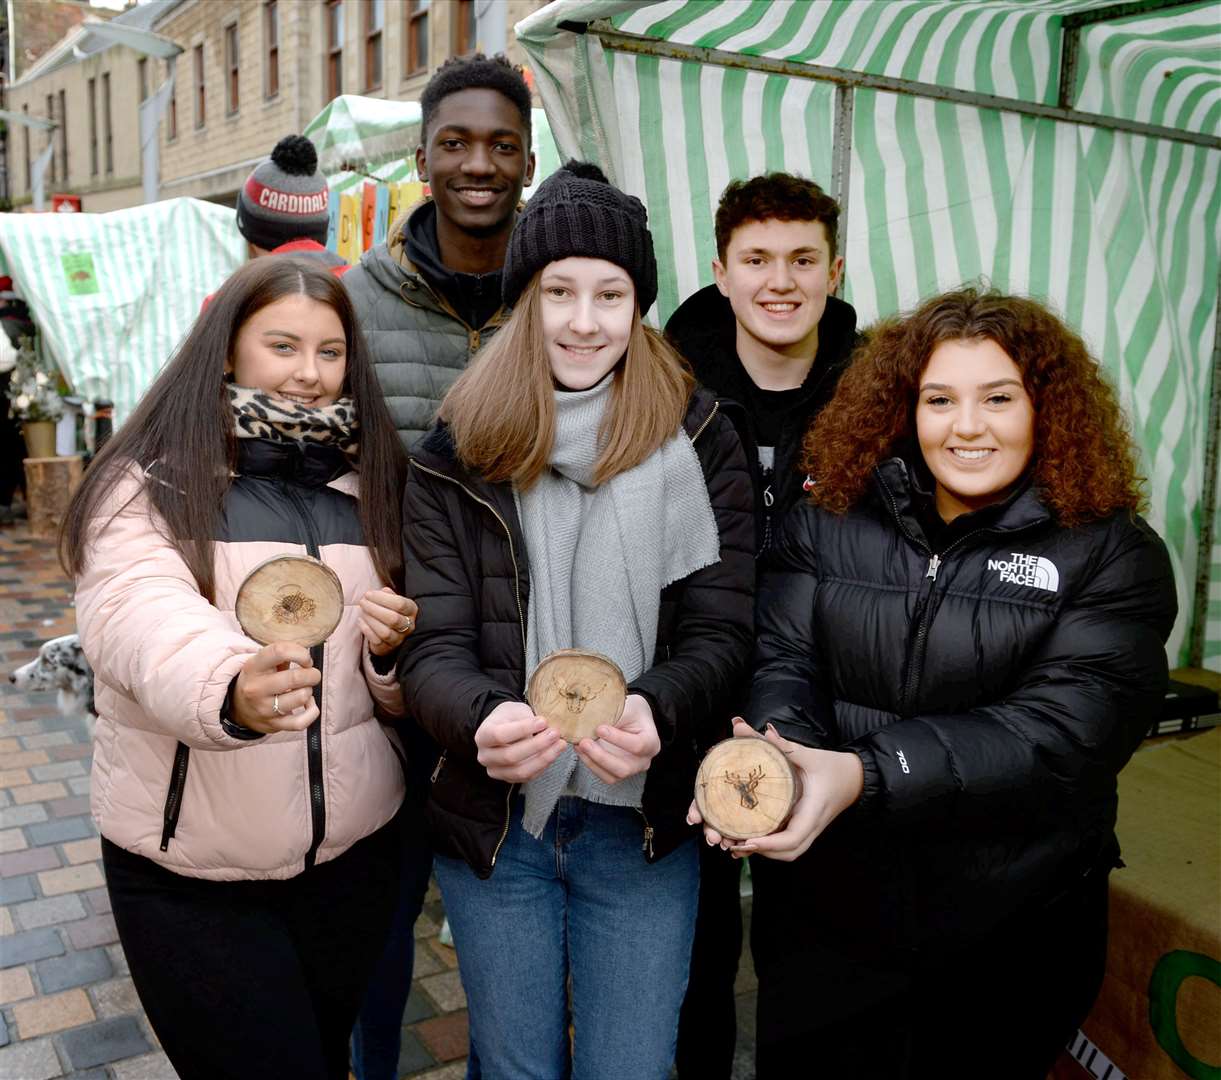 Leah Campbell, Juda Mzamu, Amy Forbes, Jack Henderson and Morgan Earras from Millburn Academy were selling wooden coasters at their Origin stall.